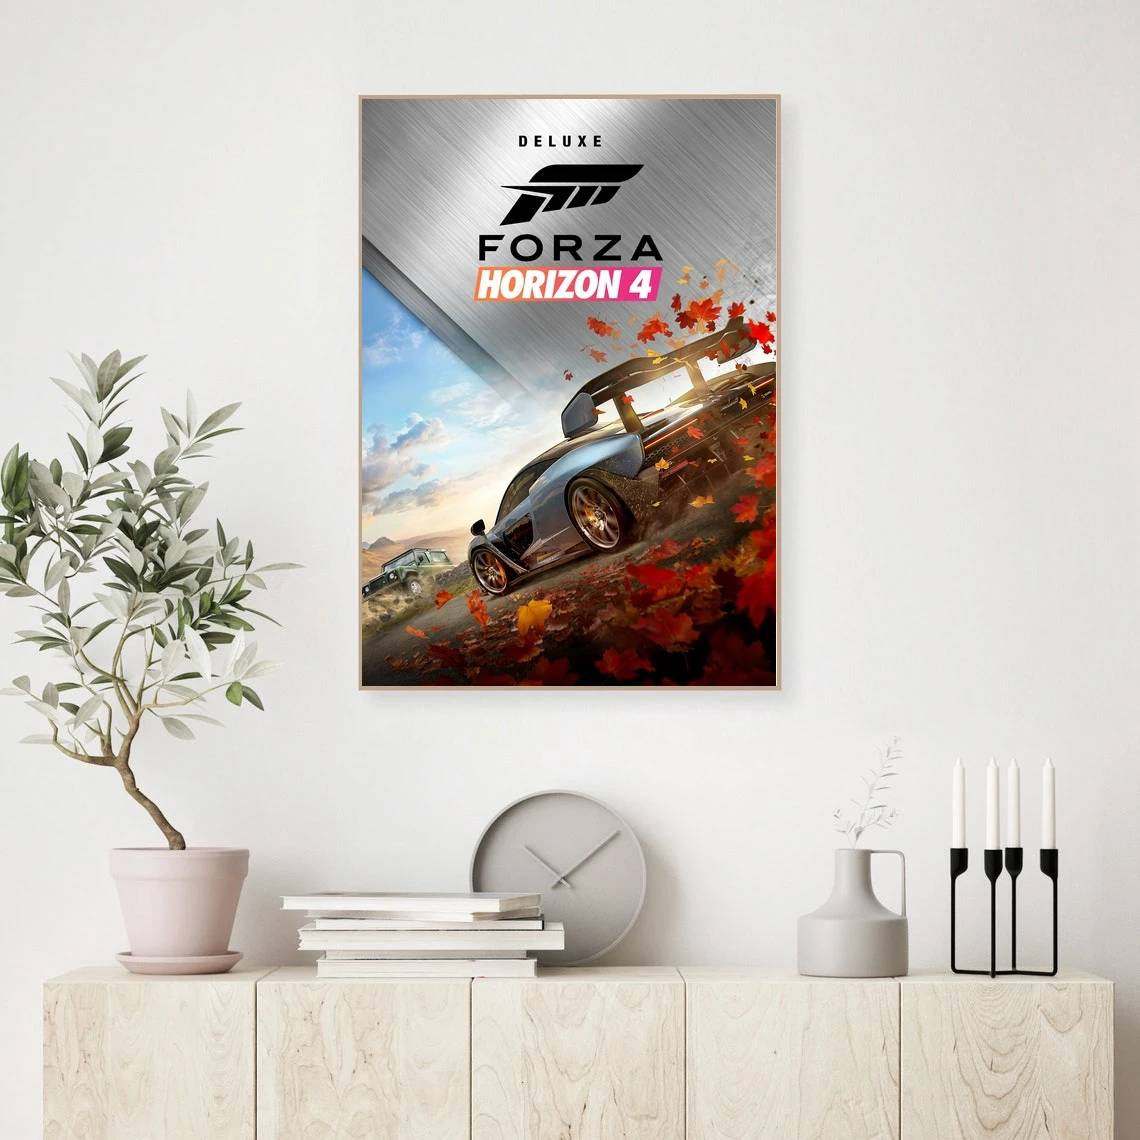 

Forza Horizon 4 Video Game Poster PC,PS4,Exclusive Role-playing RPG Game Canvas Custom Poster Alternative Artwork